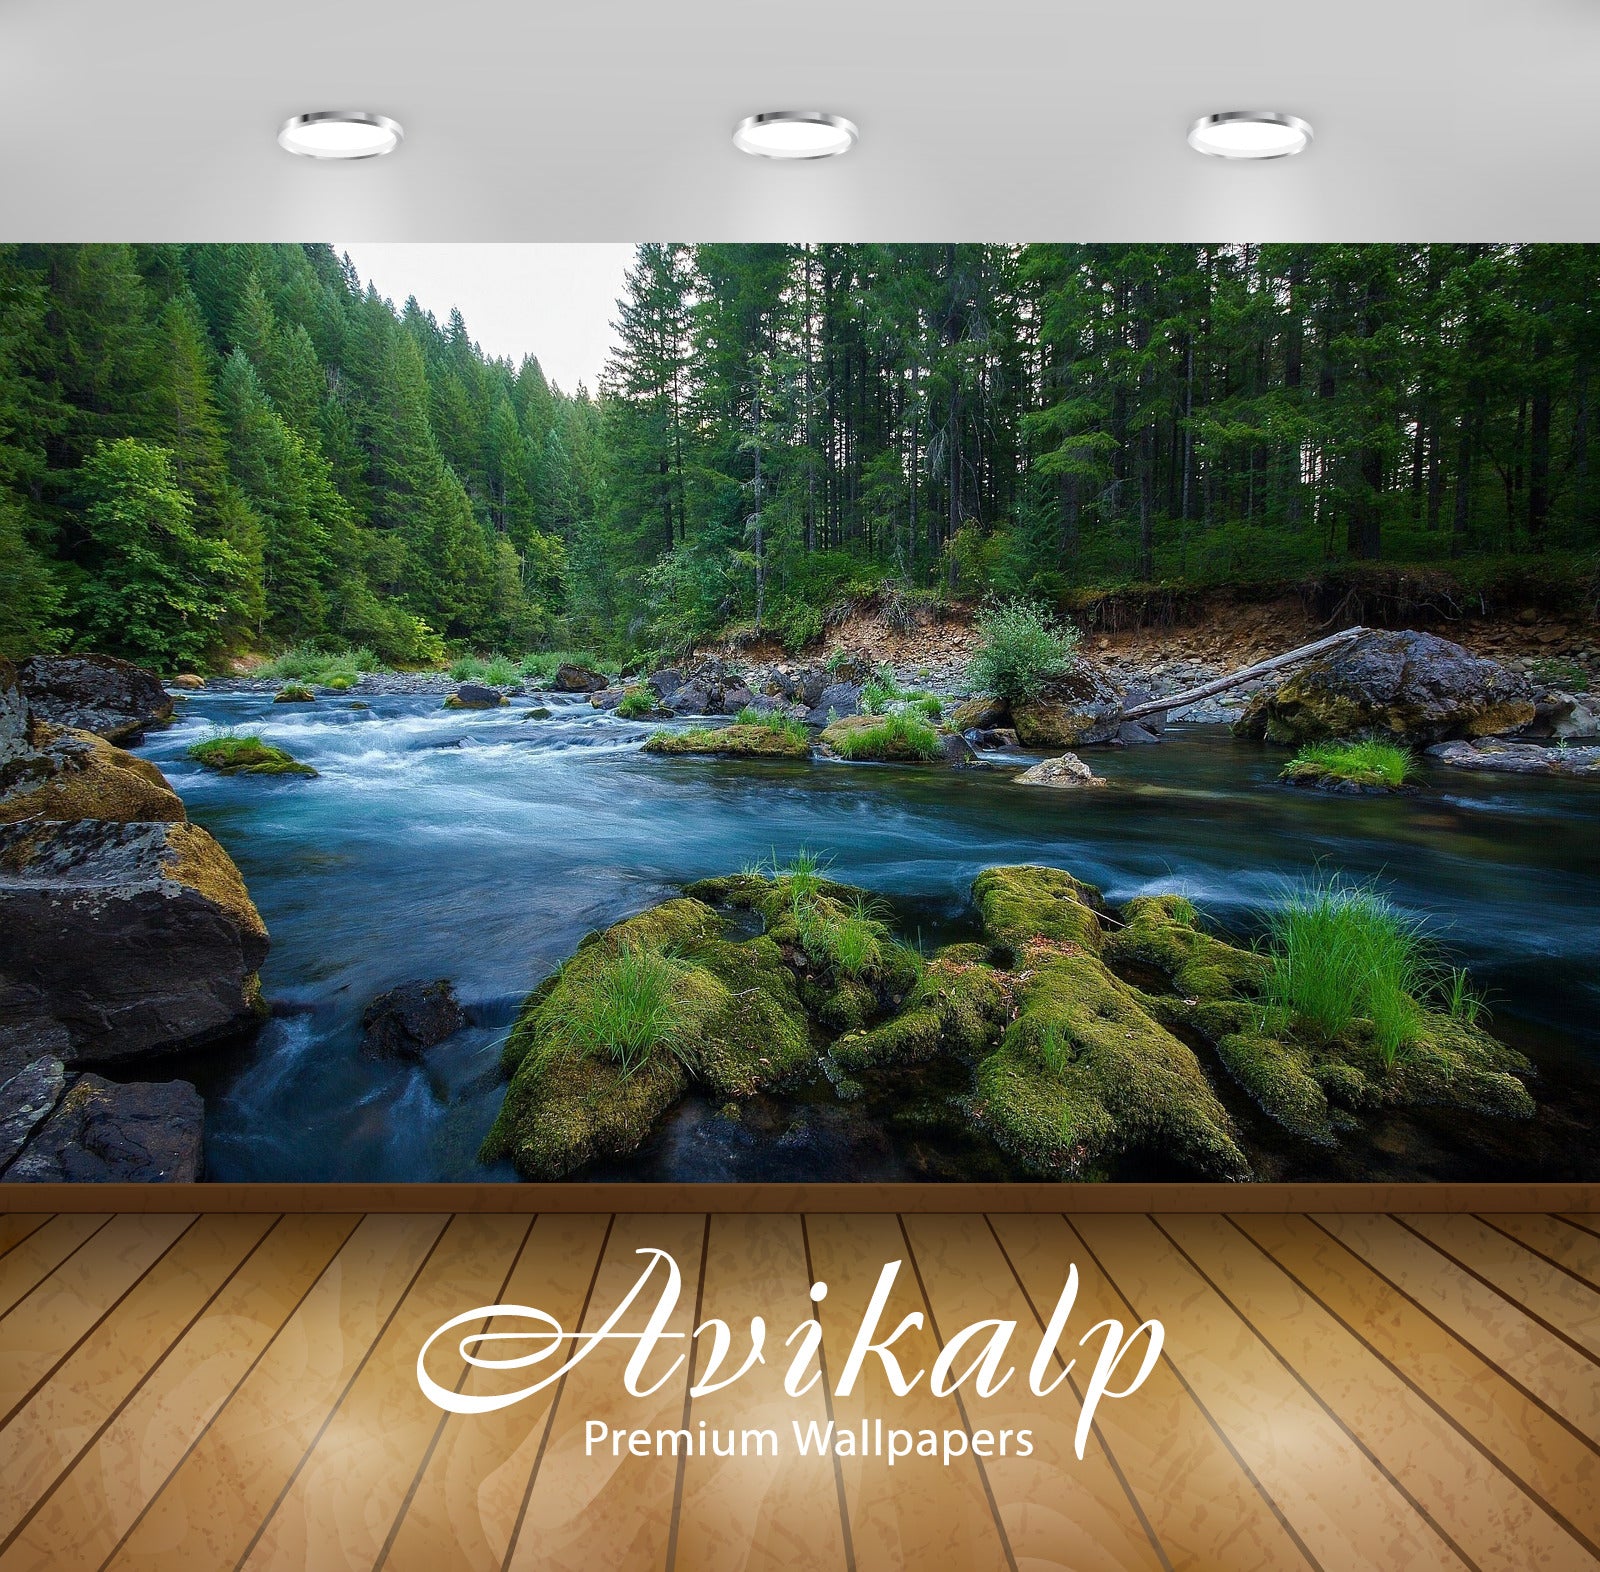 Avikalp Exclusive Awi5466 Forest River Nature Full HD Wallpapers for Living room, Hall, Kids Room, K